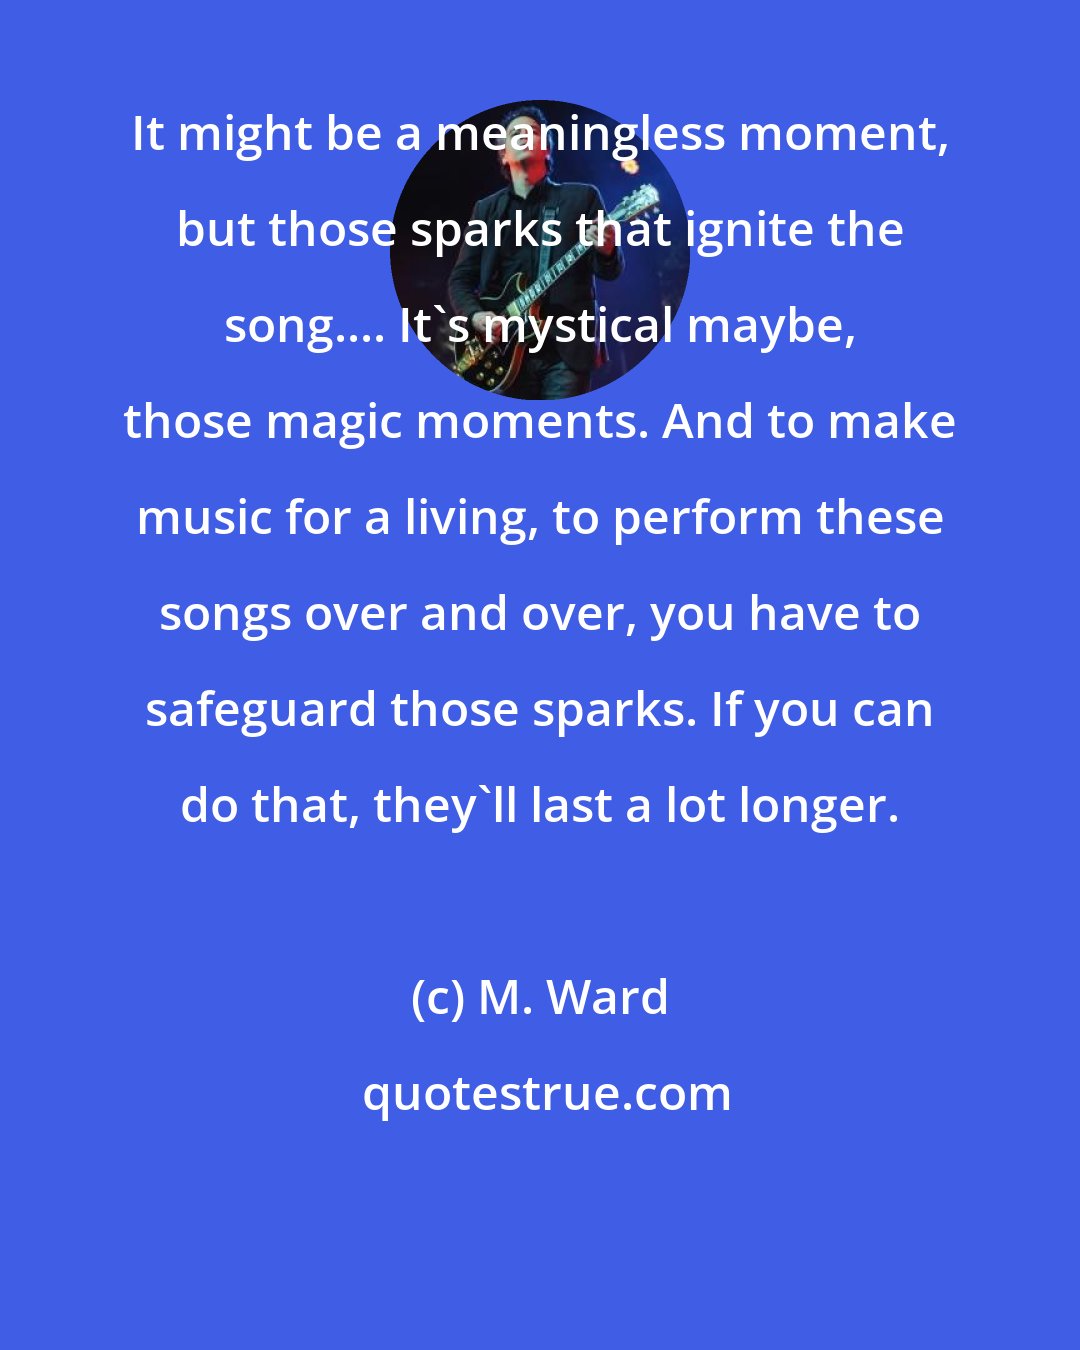 M. Ward: It might be a meaningless moment, but those sparks that ignite the song.... It's mystical maybe, those magic moments. And to make music for a living, to perform these songs over and over, you have to safeguard those sparks. If you can do that, they'll last a lot longer.